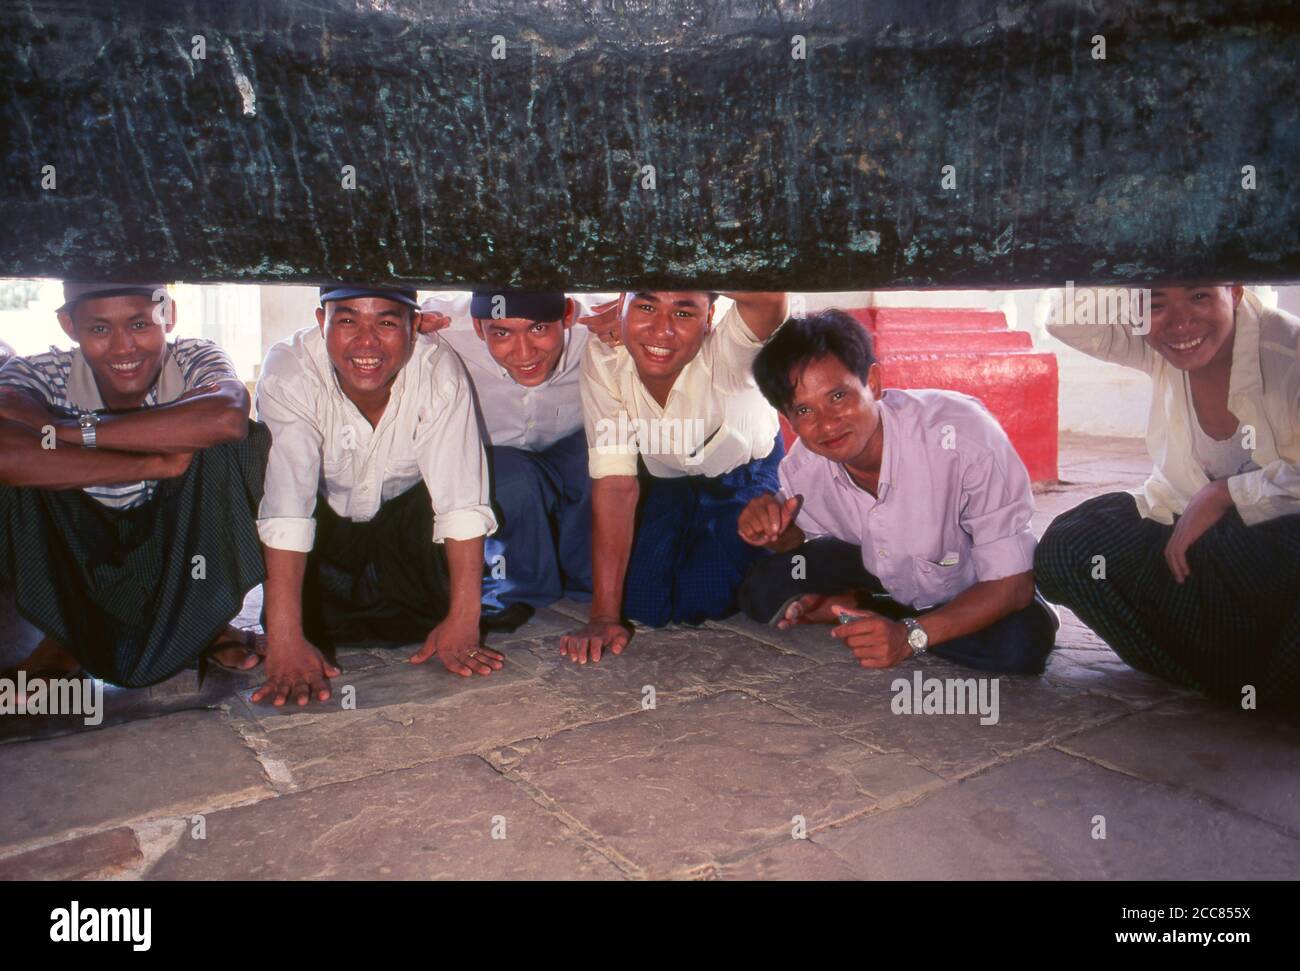 Burma / Myanmar: A group of young men looking inside the giant Mingun Bell in Sagaing Division, Burma. The Mingun Bell is a giant bell located in Mingun, on the western bank of the Irrawaddy River, Sagaing Region, Myanmar. It was the heaviest functioning bell in the world at several times in history. The weight of the bell is 90,718 kg or 199,999 pounds. The bell is uncracked and in good ringing condition. Casting of the bell started in 1808 and was finished by 1810. King Bodawpaya (r. 1782–1819) had this gigantic bell cast to go with his huge stupa, Mingun Pahtodawgyi. Stock Photo